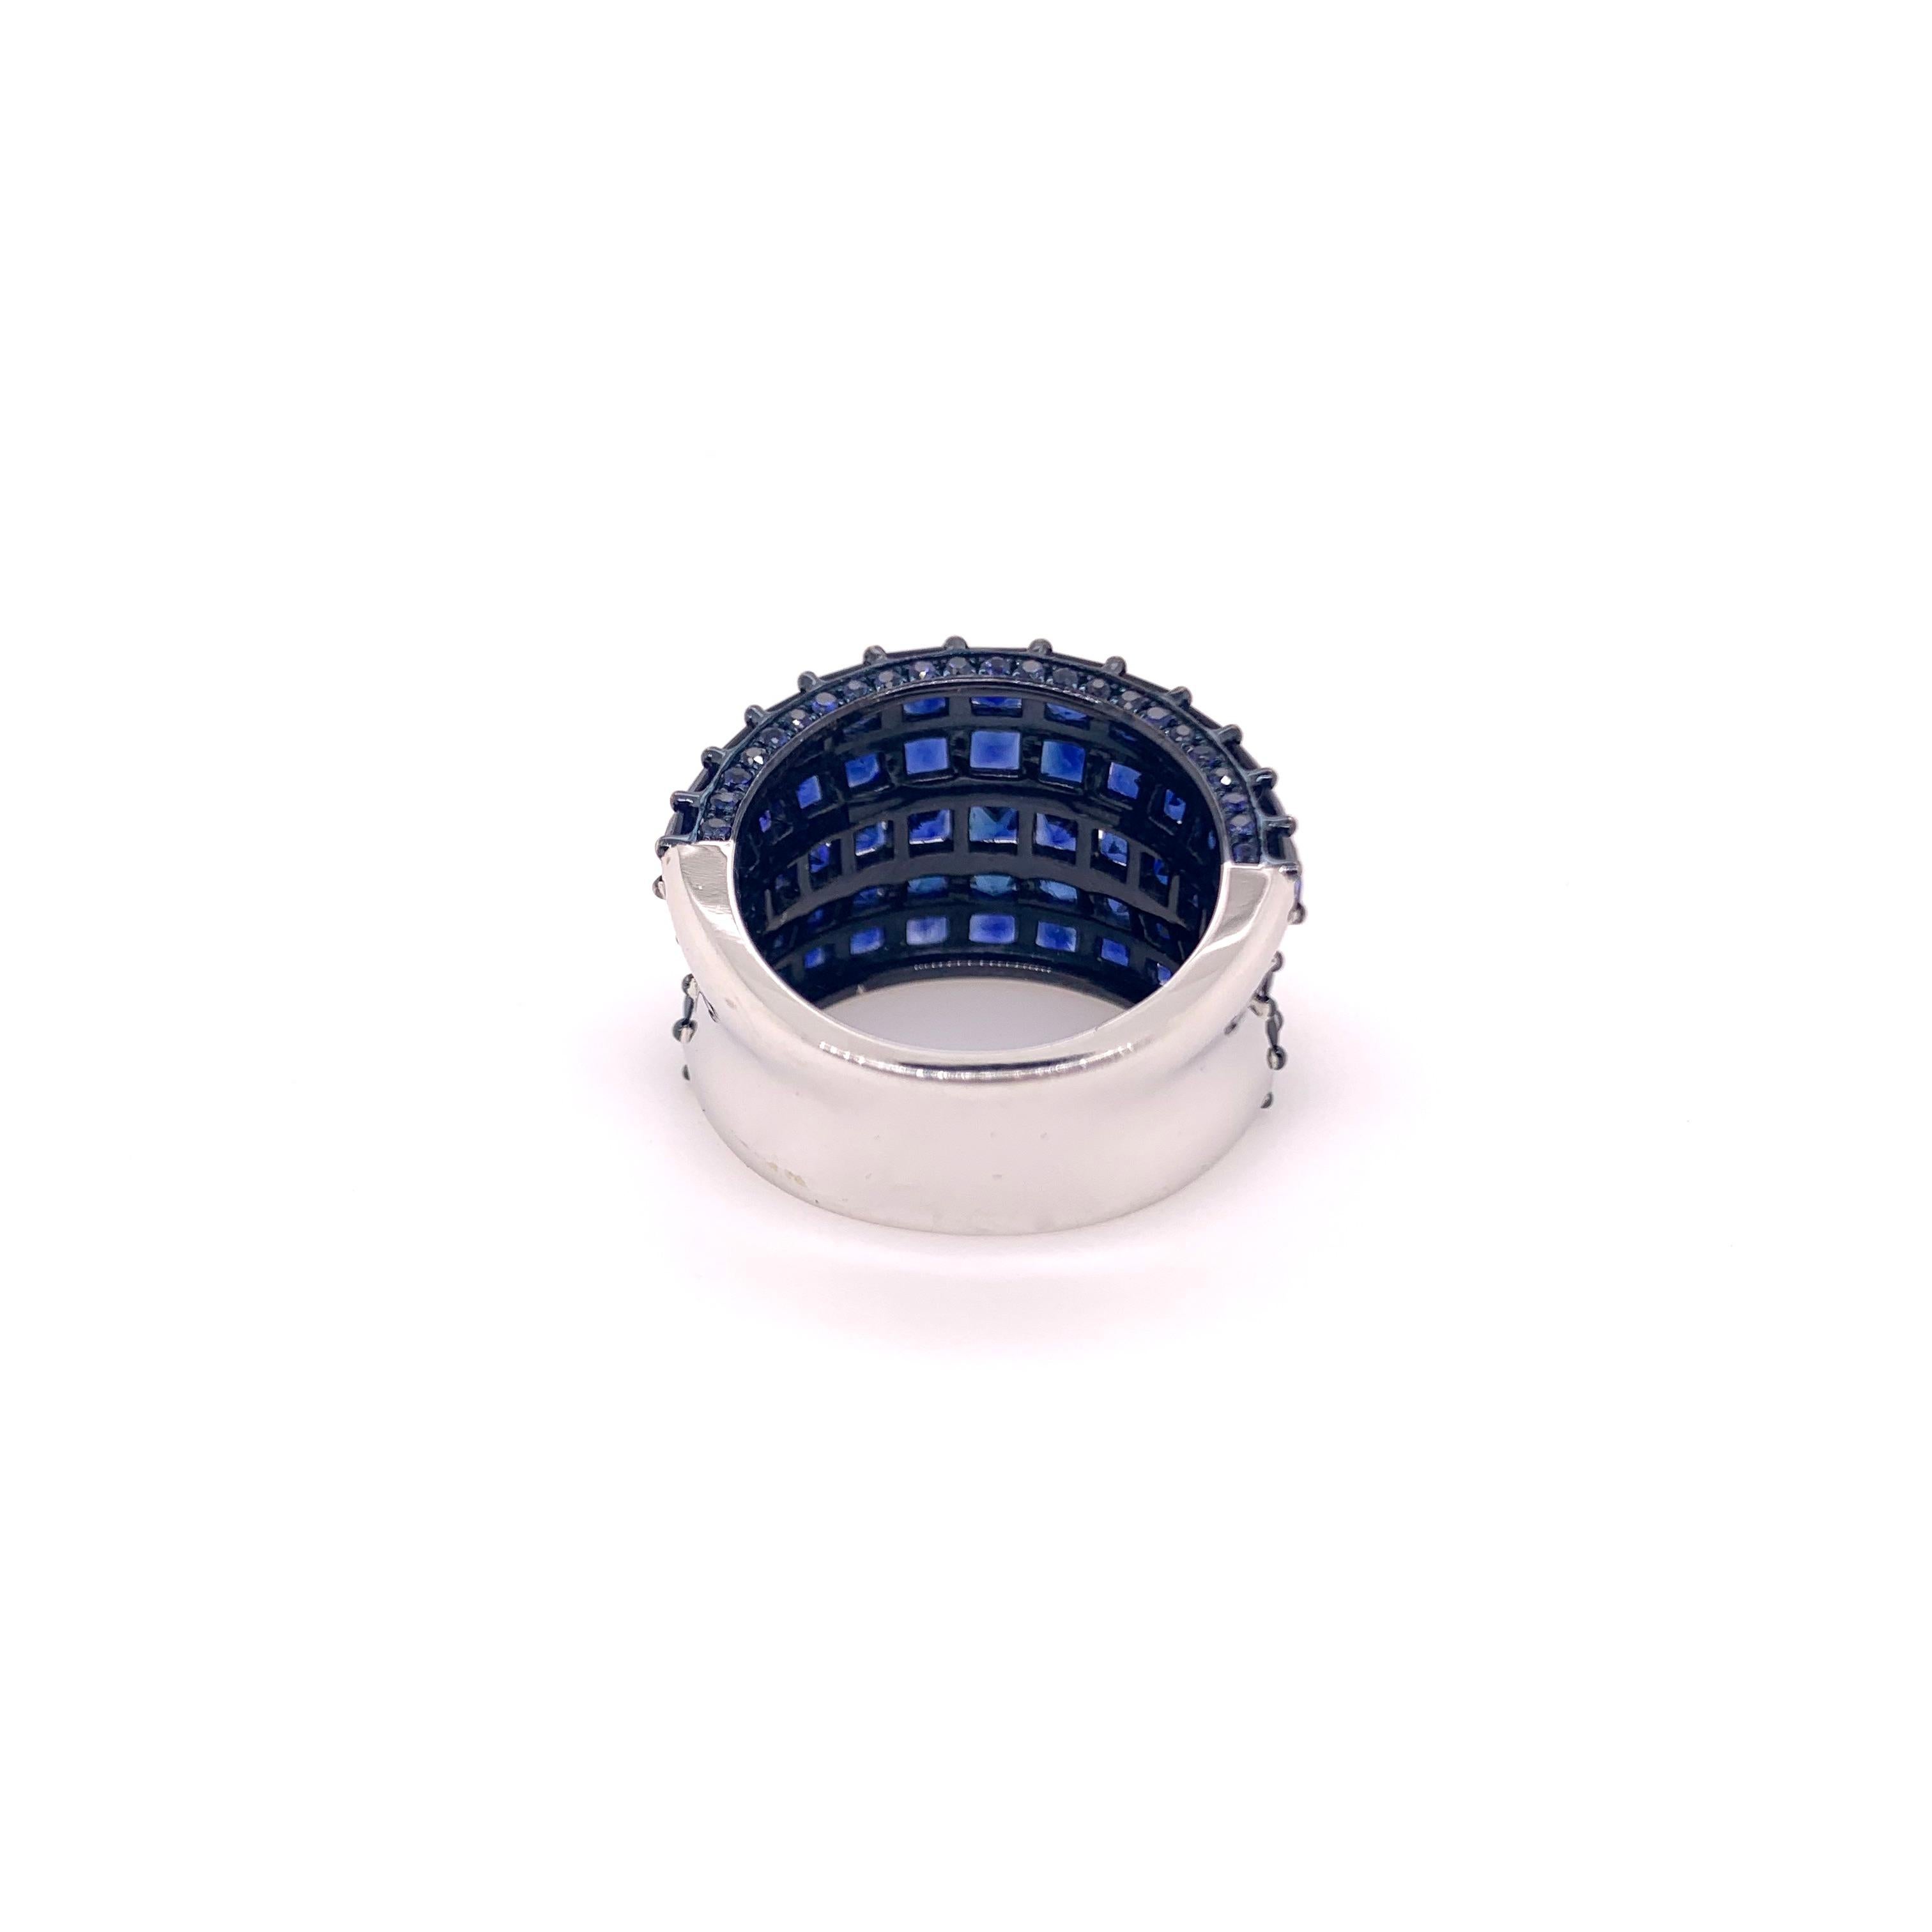 A stunning statement piece designed for casual and formal events! 18k White gold blue sapphire ring in a wide, cigar band style set with square and round cut sapphires.   The prongs are rhodium blue to give a more stunning, dramatic look! The